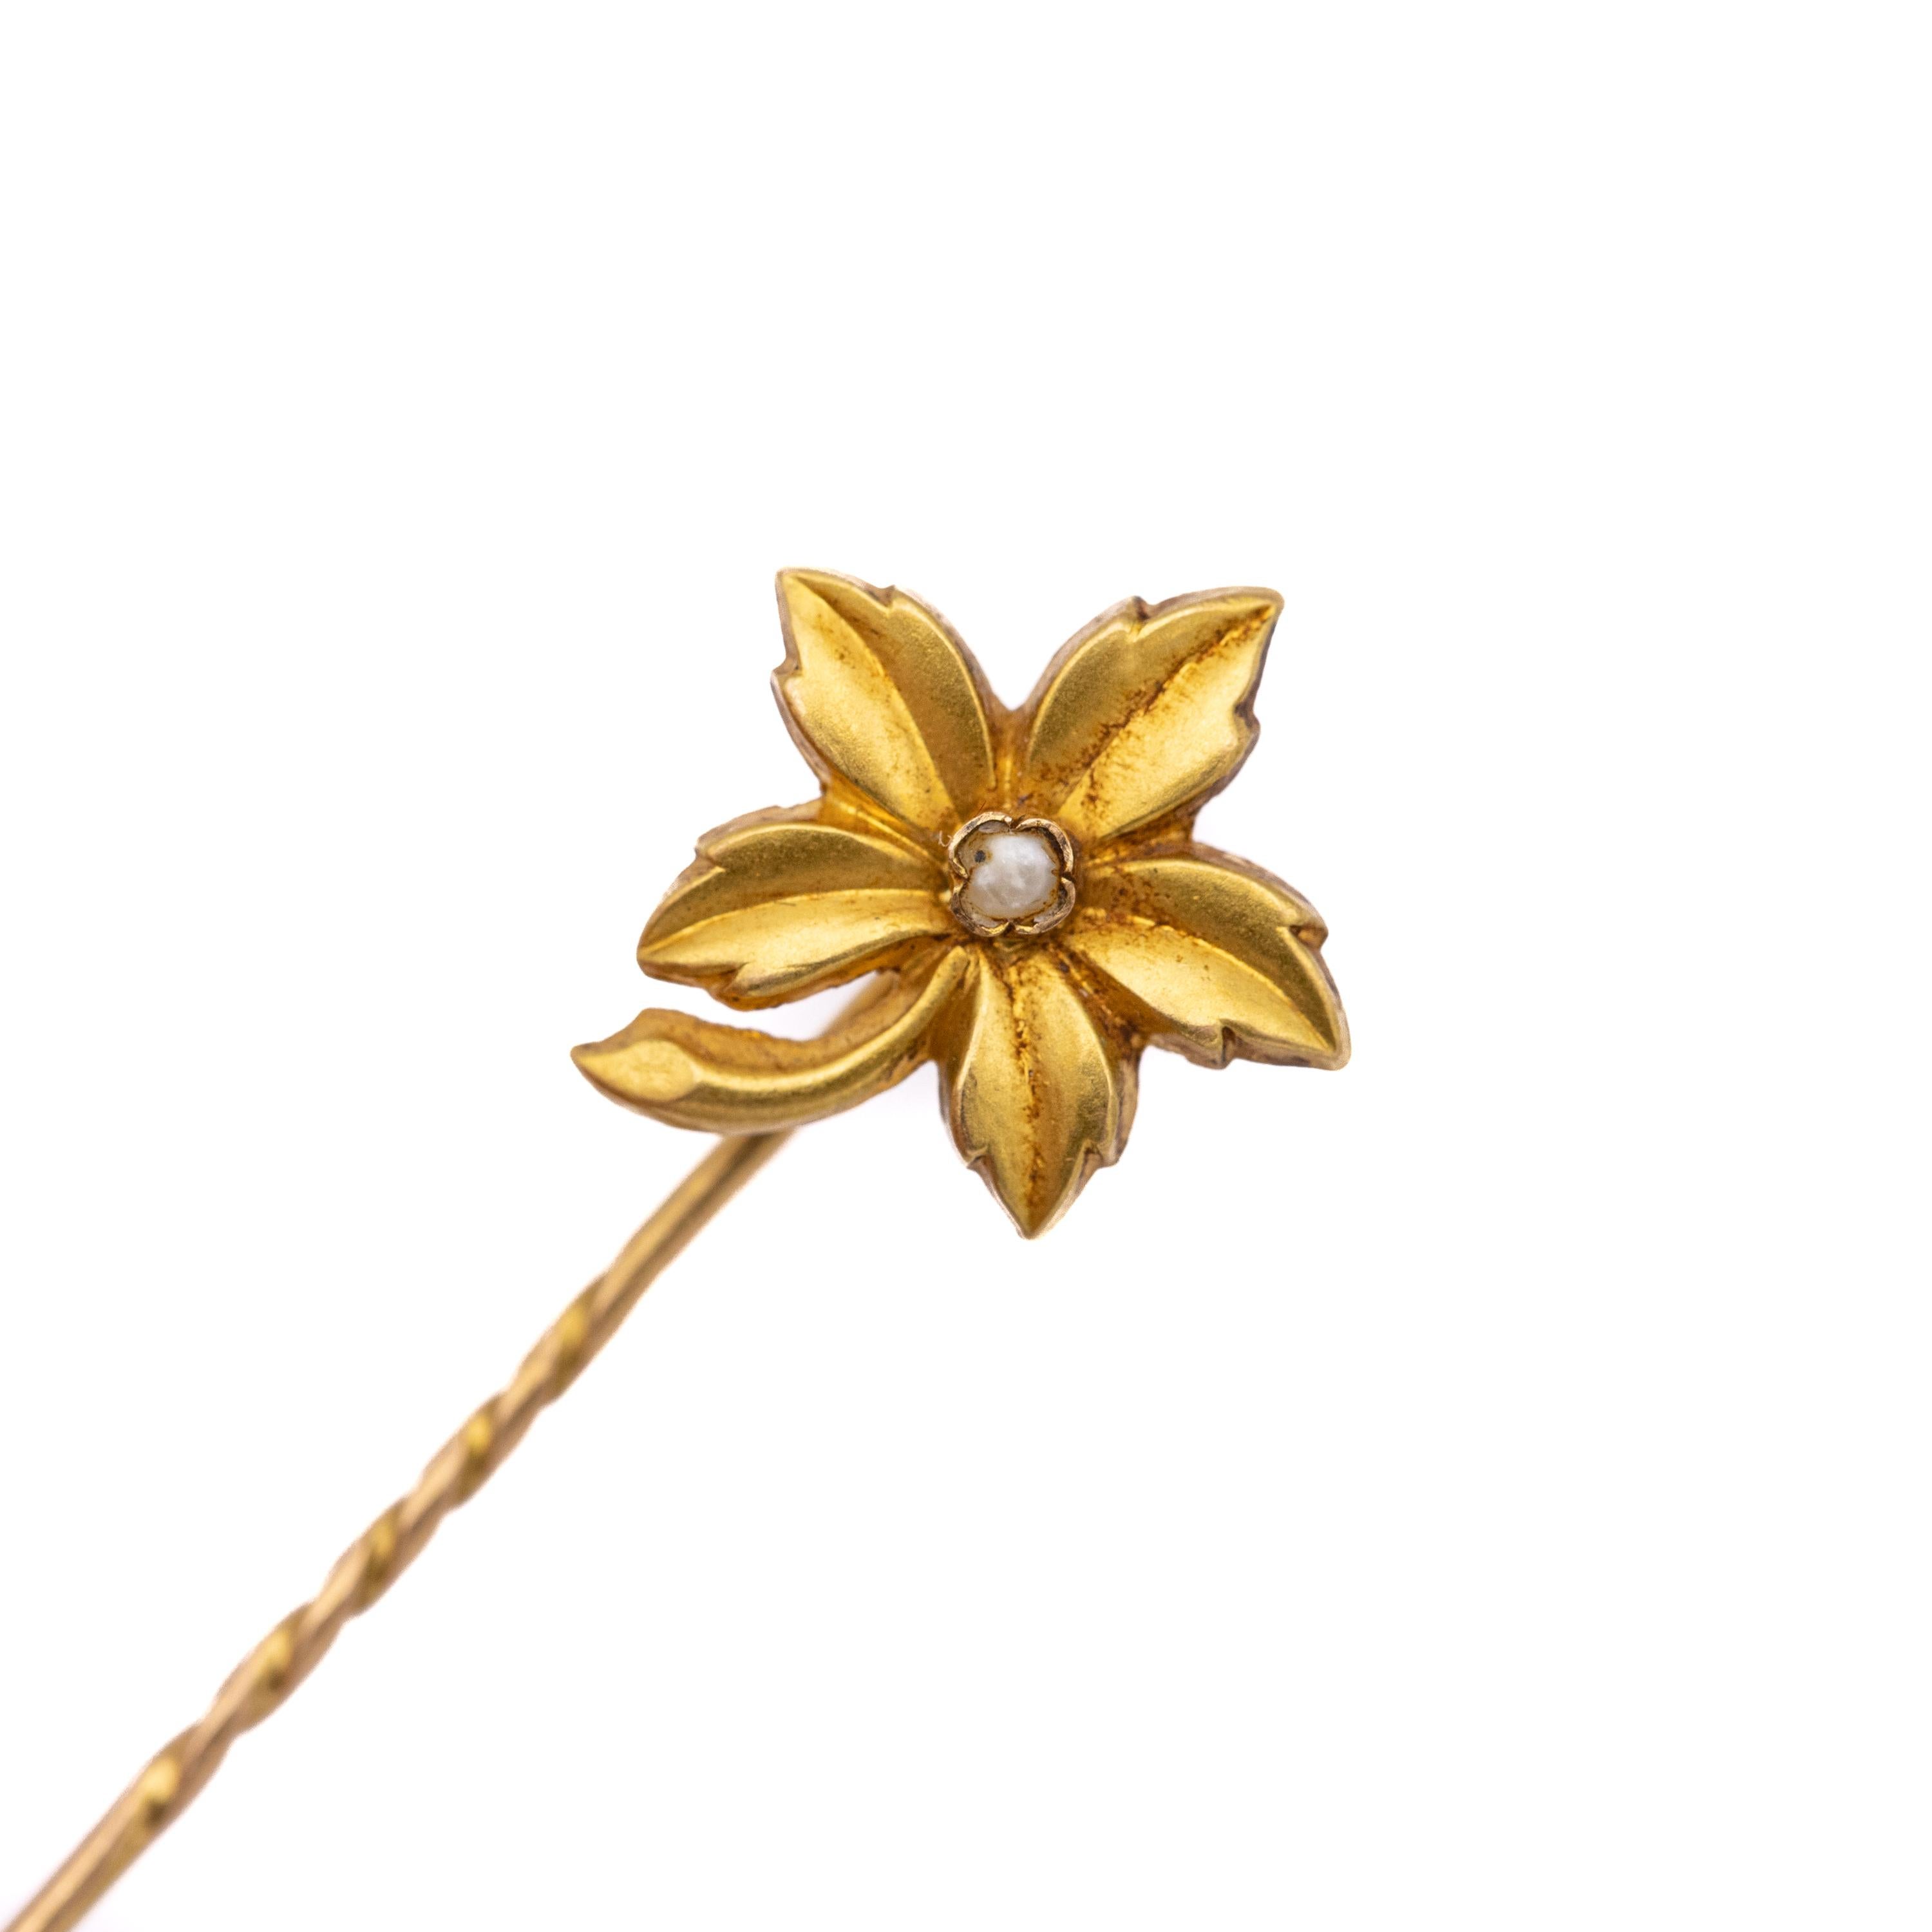 18k Yellow gold stick pin - Family brooch - detailed Ivy cravat pin For Sale 9